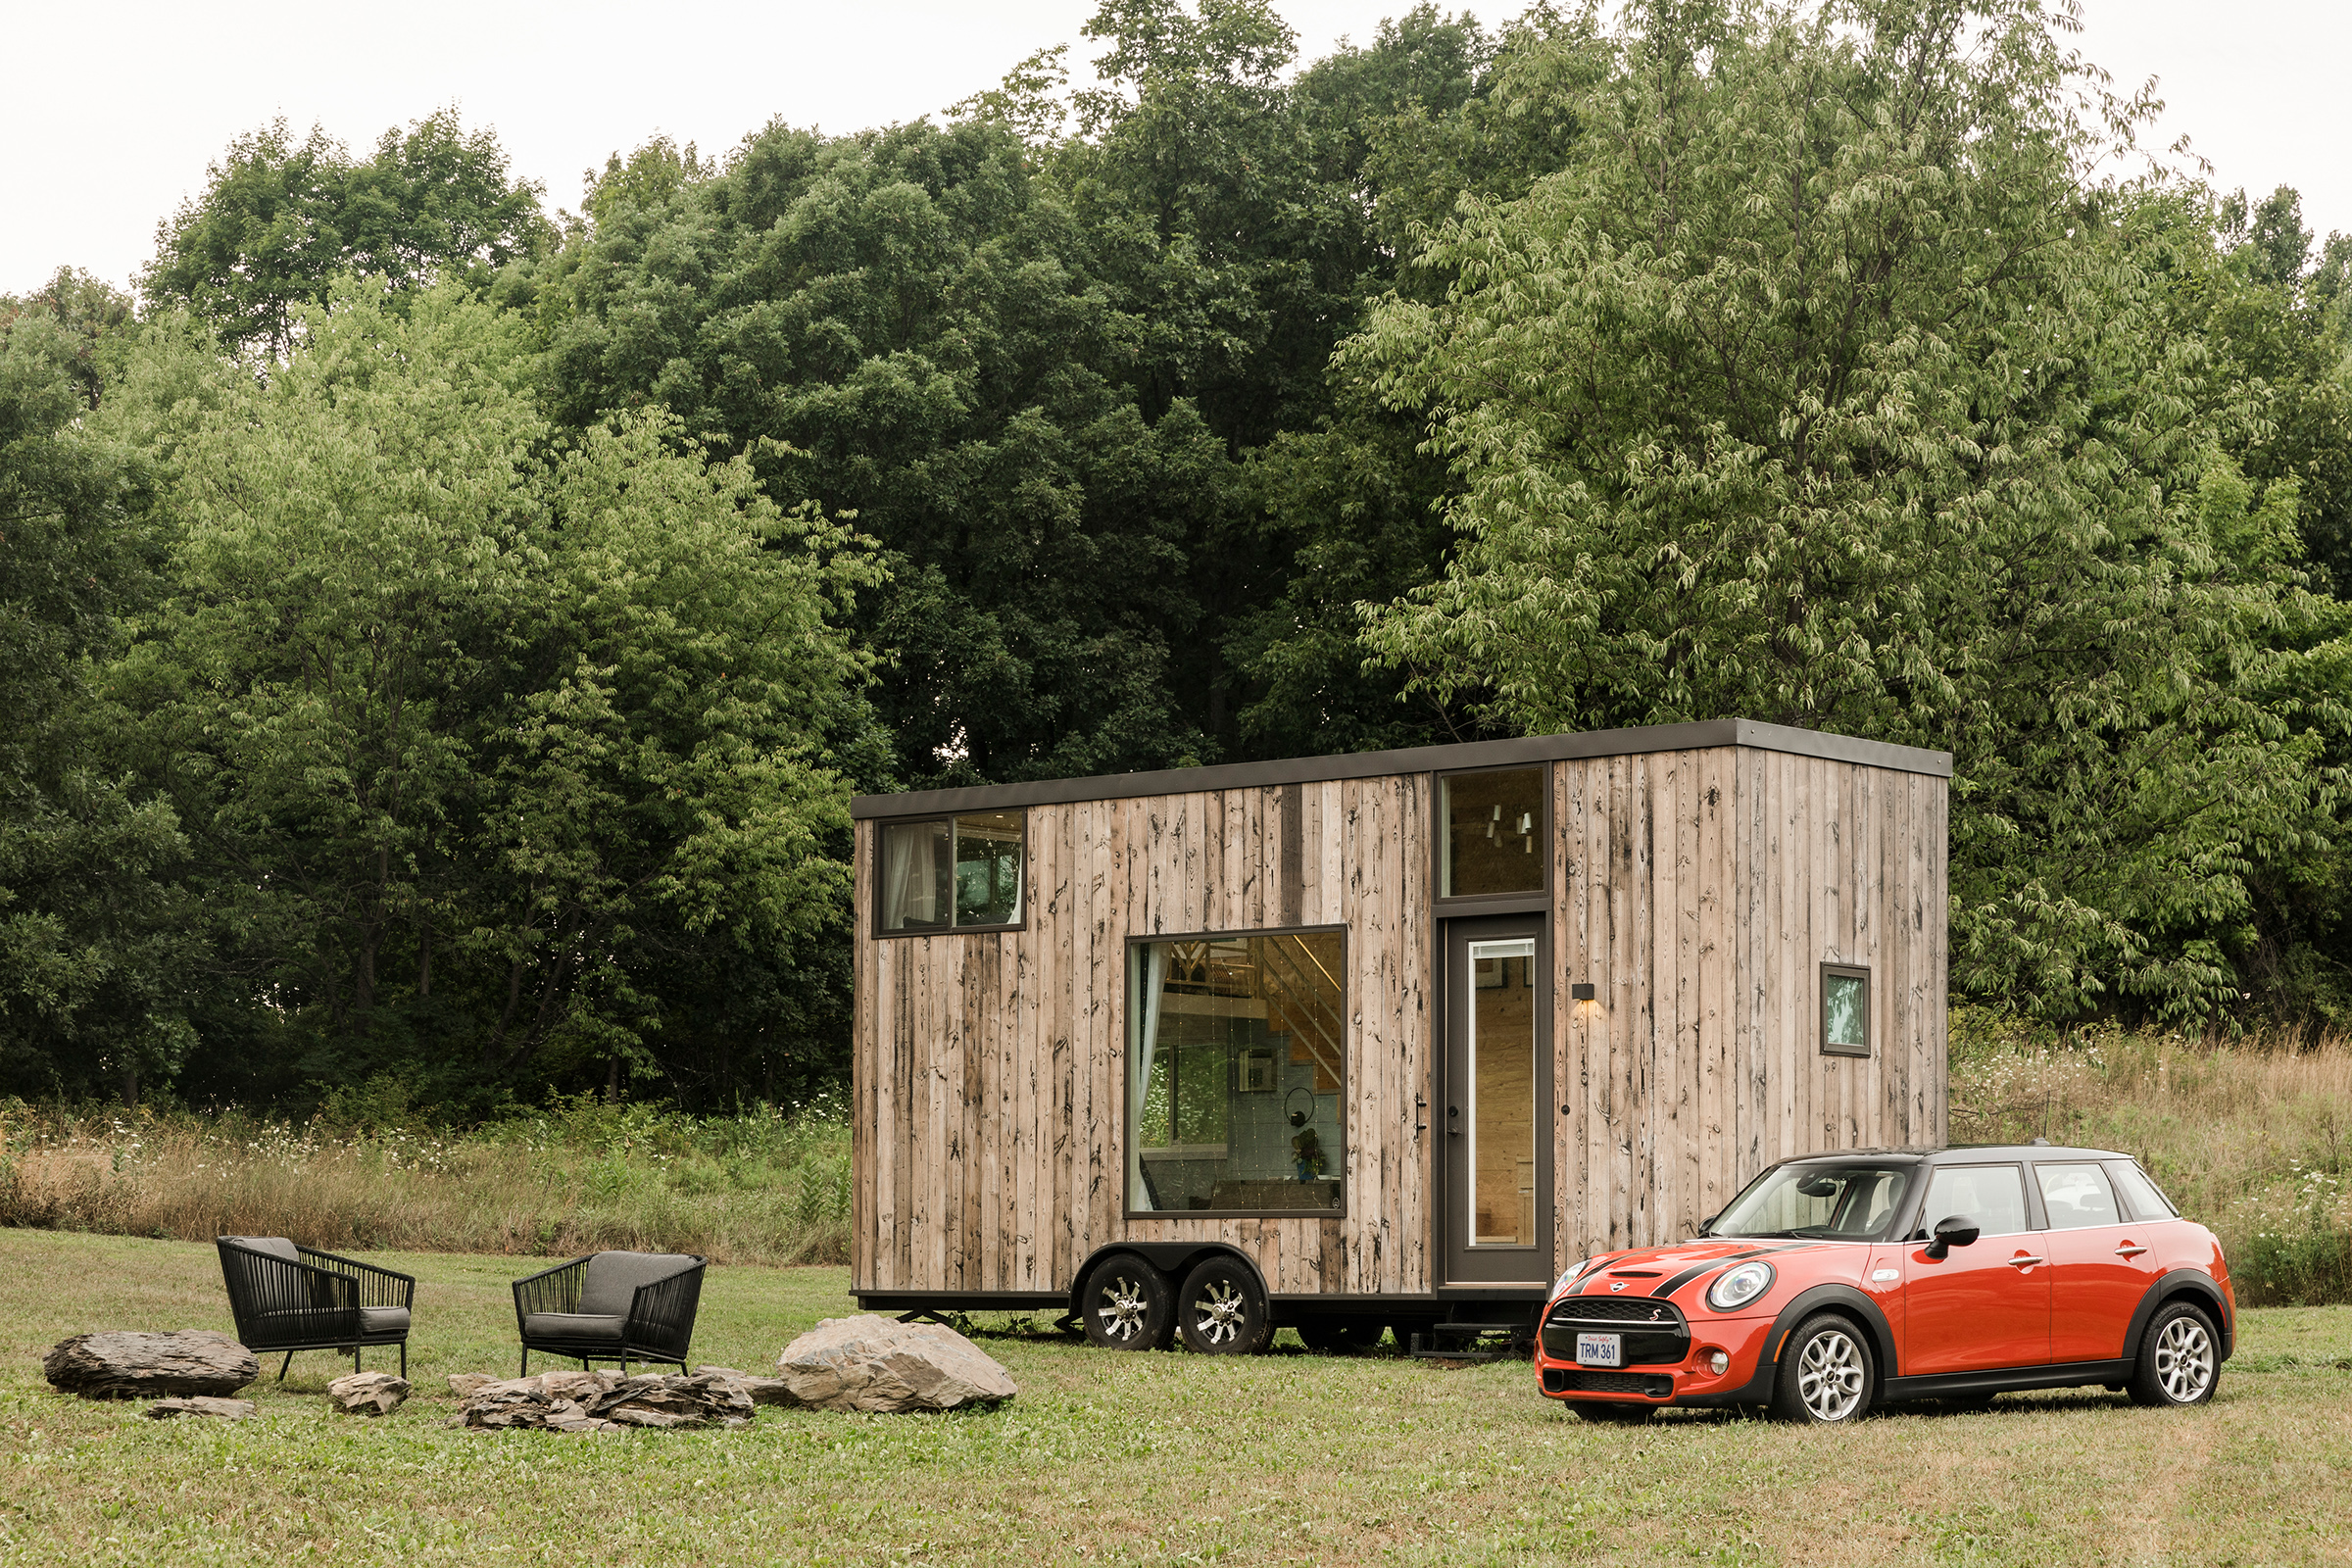 A red MINI Cooper is parked outside of an Airbnb tiny home listing with an outdoor seating area in Marlboro, New York.